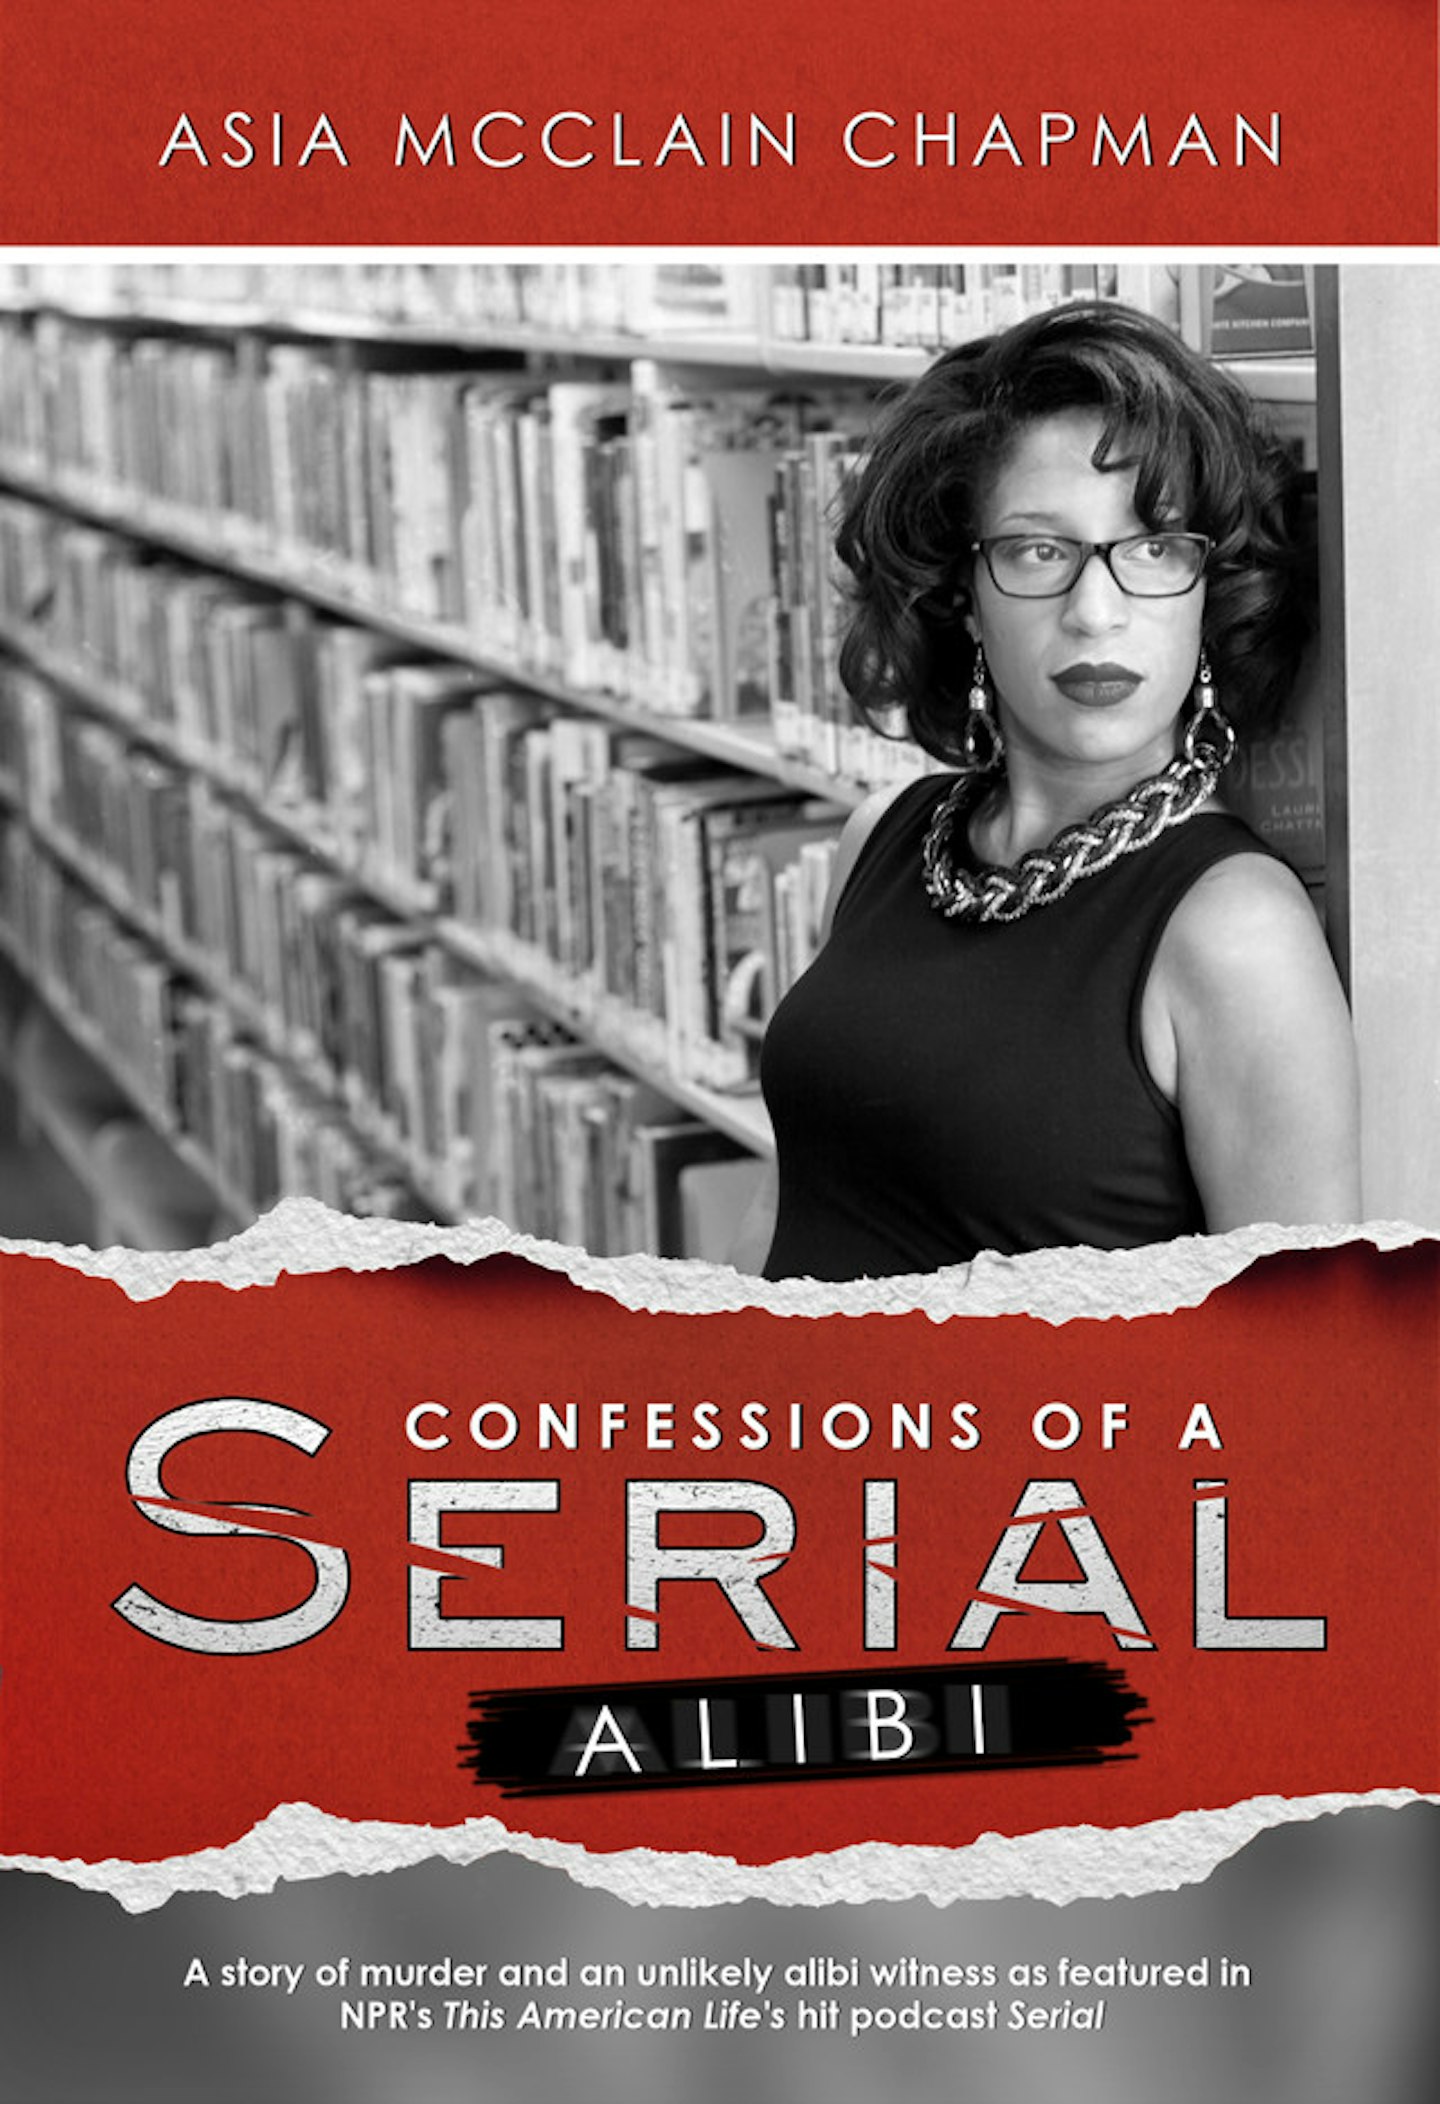 Confessions-of-a-serial-alibi-asia-mcclain-chapman-adnan-syed-hae-min-lee-serial-podcast-season-one-episode-one-2